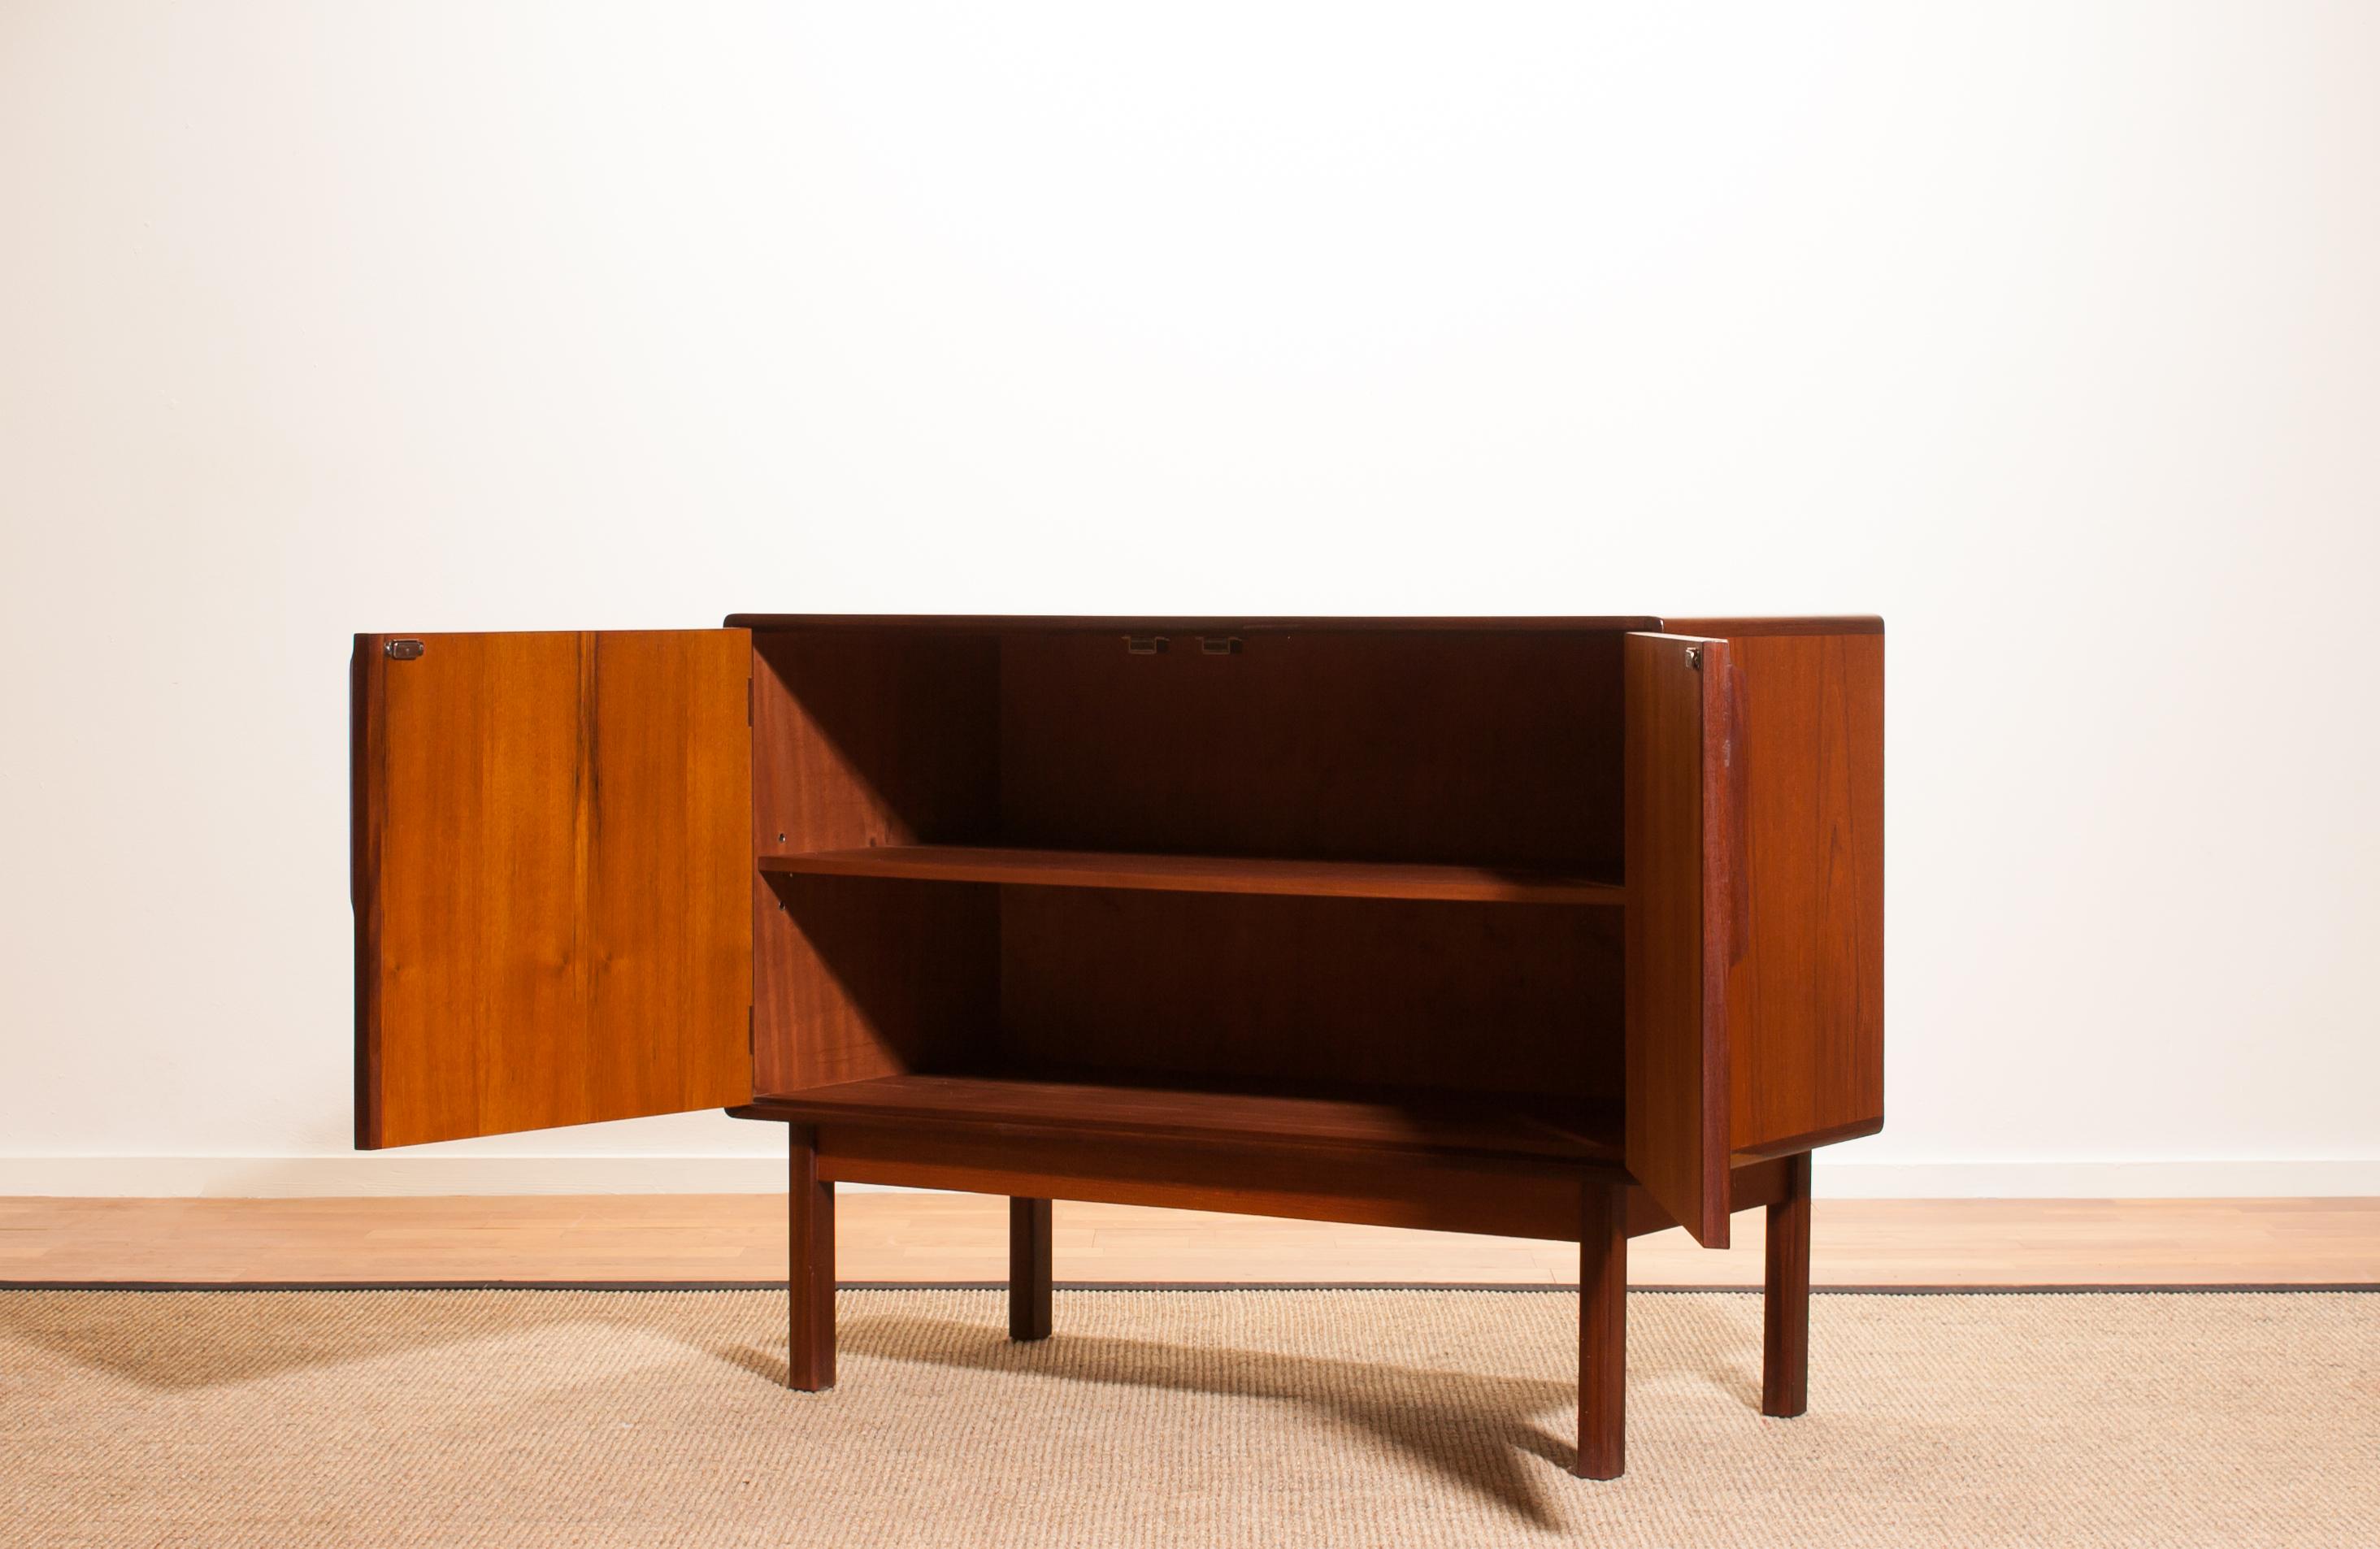 Beautiful small sideboard made by Asko Finland.
This cabinet is made of teak and walnut and in a wonderful condition.
It has two doors and a shelf inside.
Period 1960s.
Dimension: H 73 cm, W 97 cm, D 45 cm.